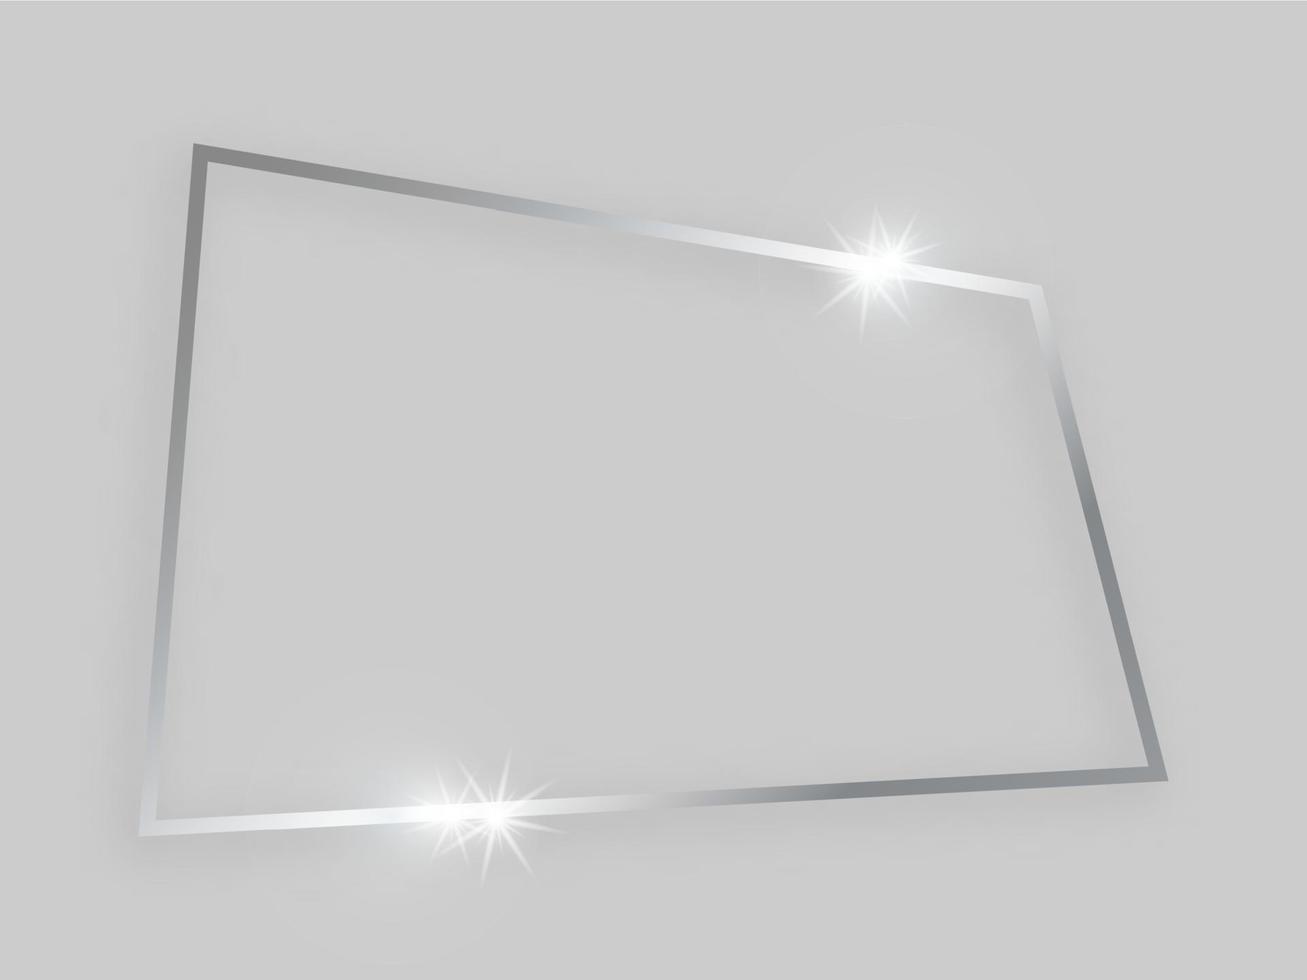 Shiny frame with glowing effects. Silver quadrangular frame with shadow on grey background. Vector illustration